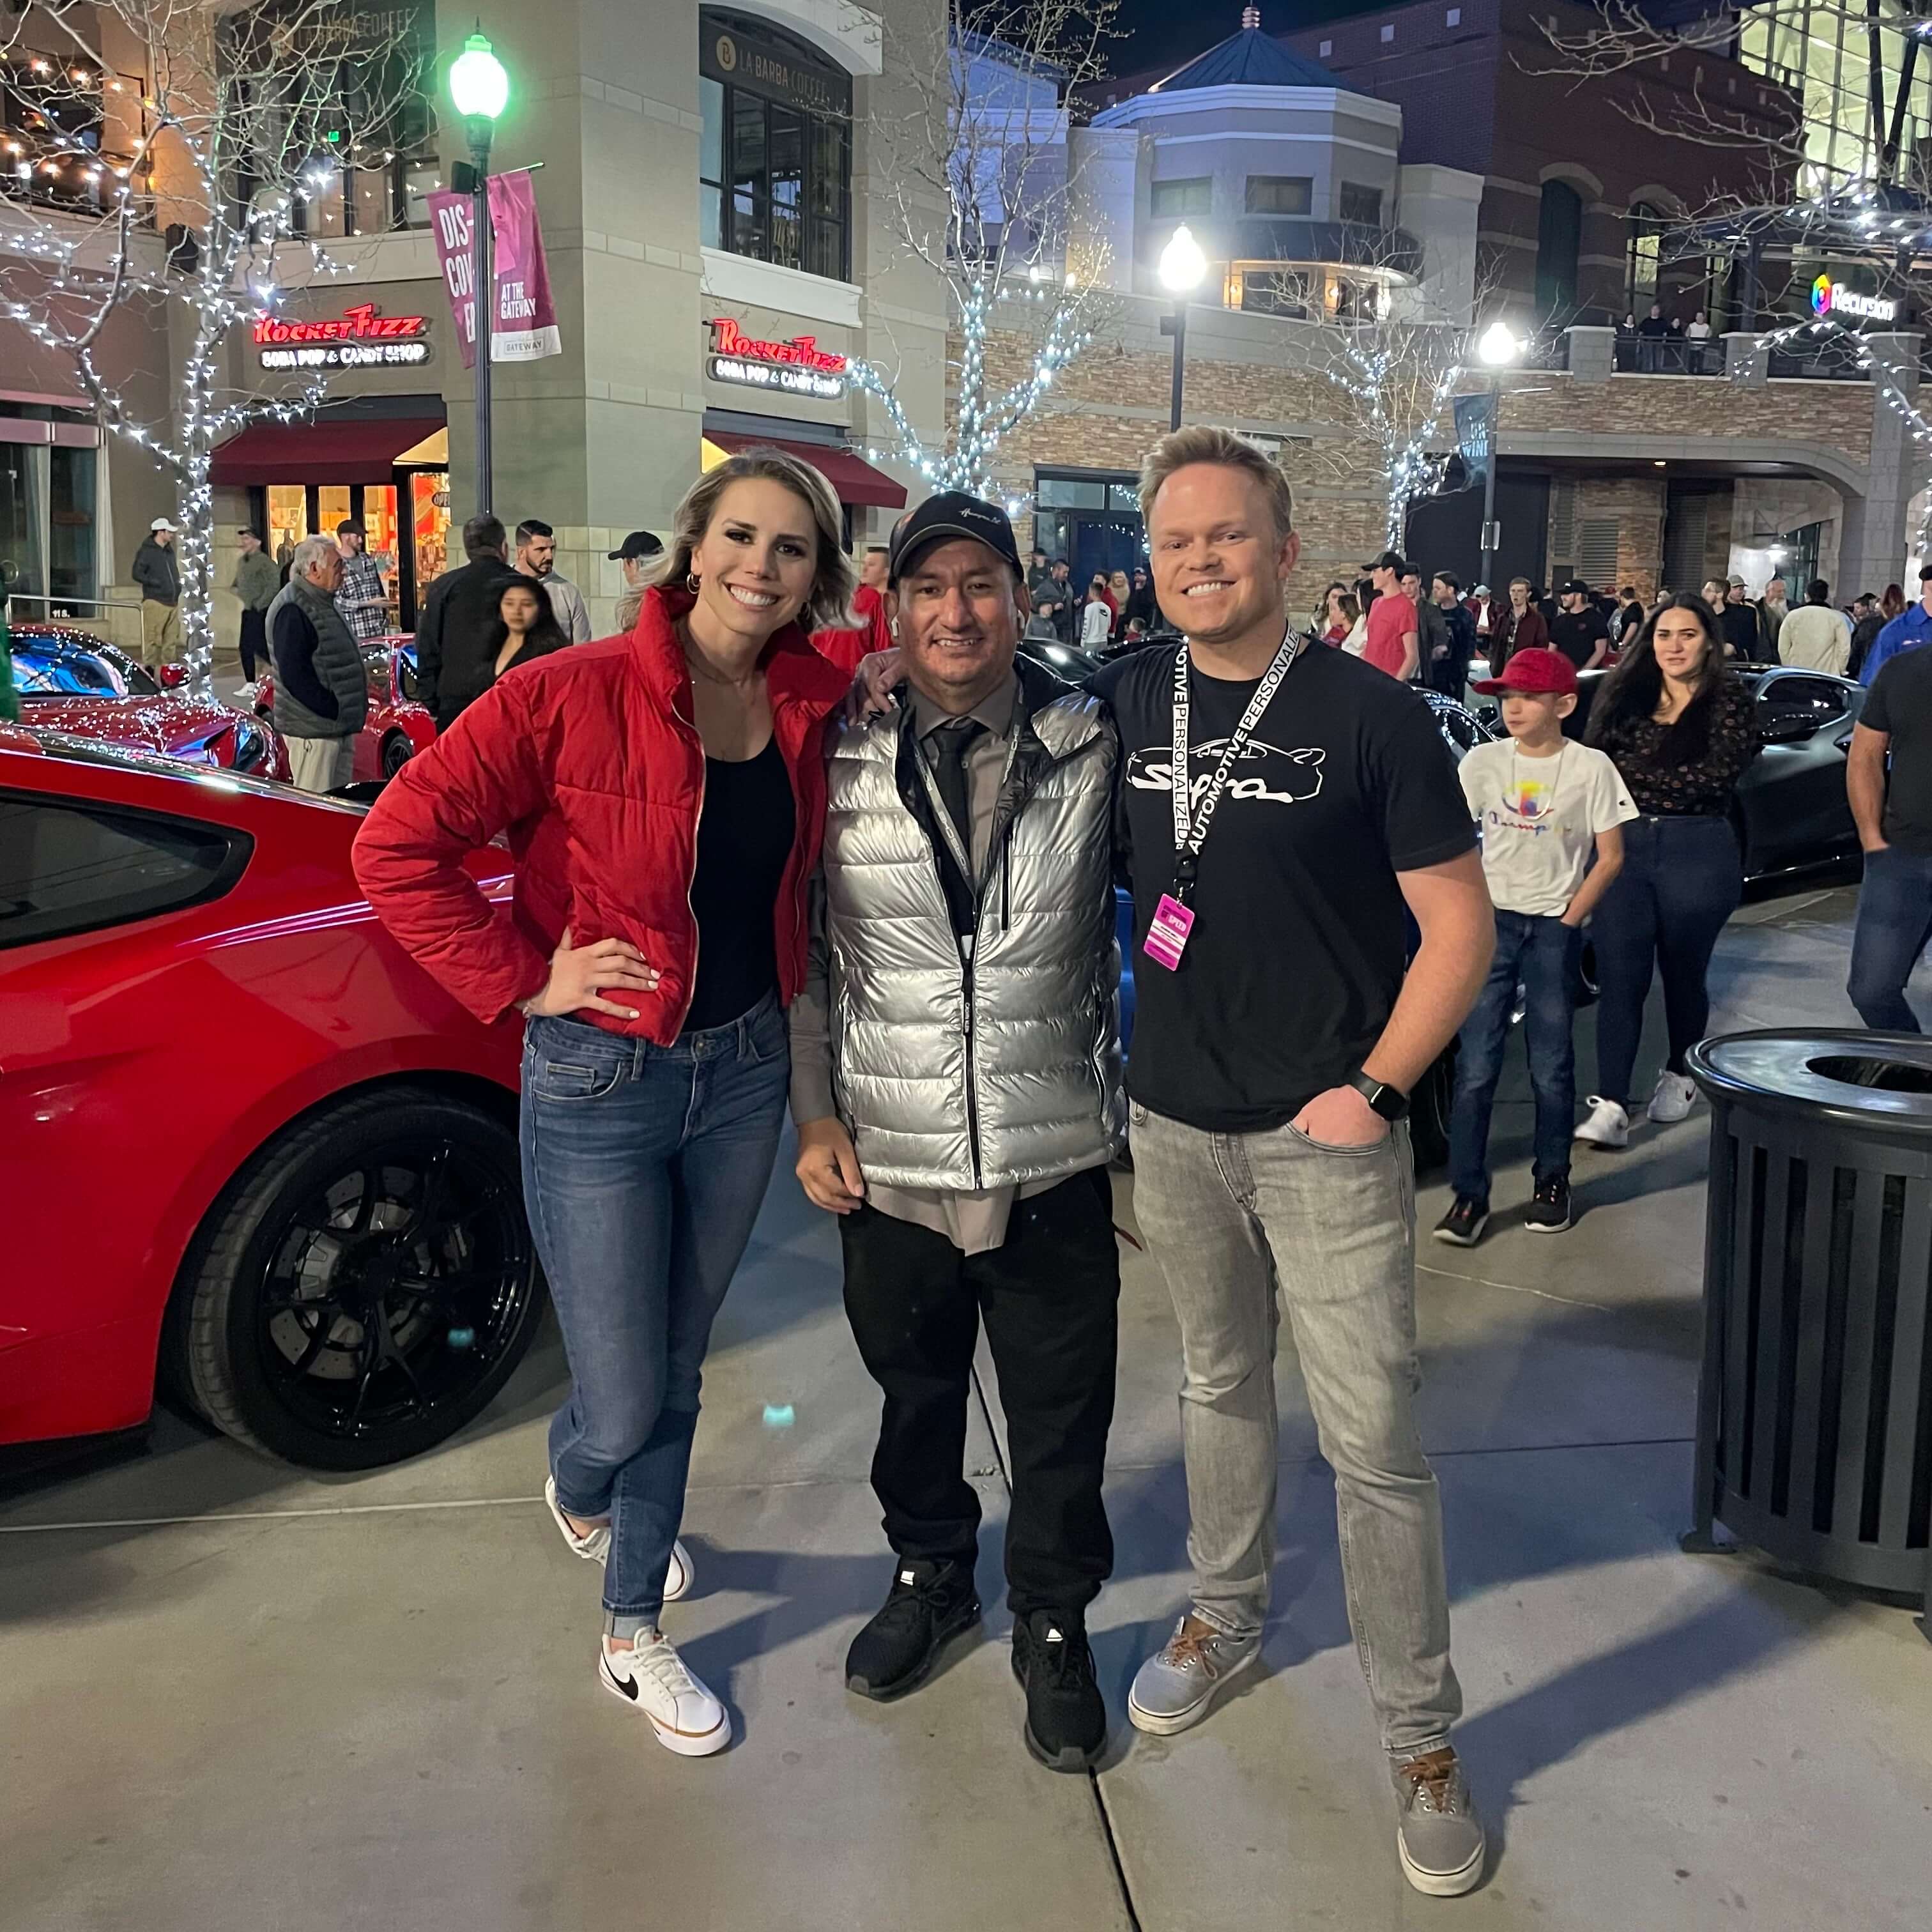 Event organizer Ish with Tiffany Rhodes, KSL Cars Marketing Manager, and Jason Bell, writer for KSL Cars.